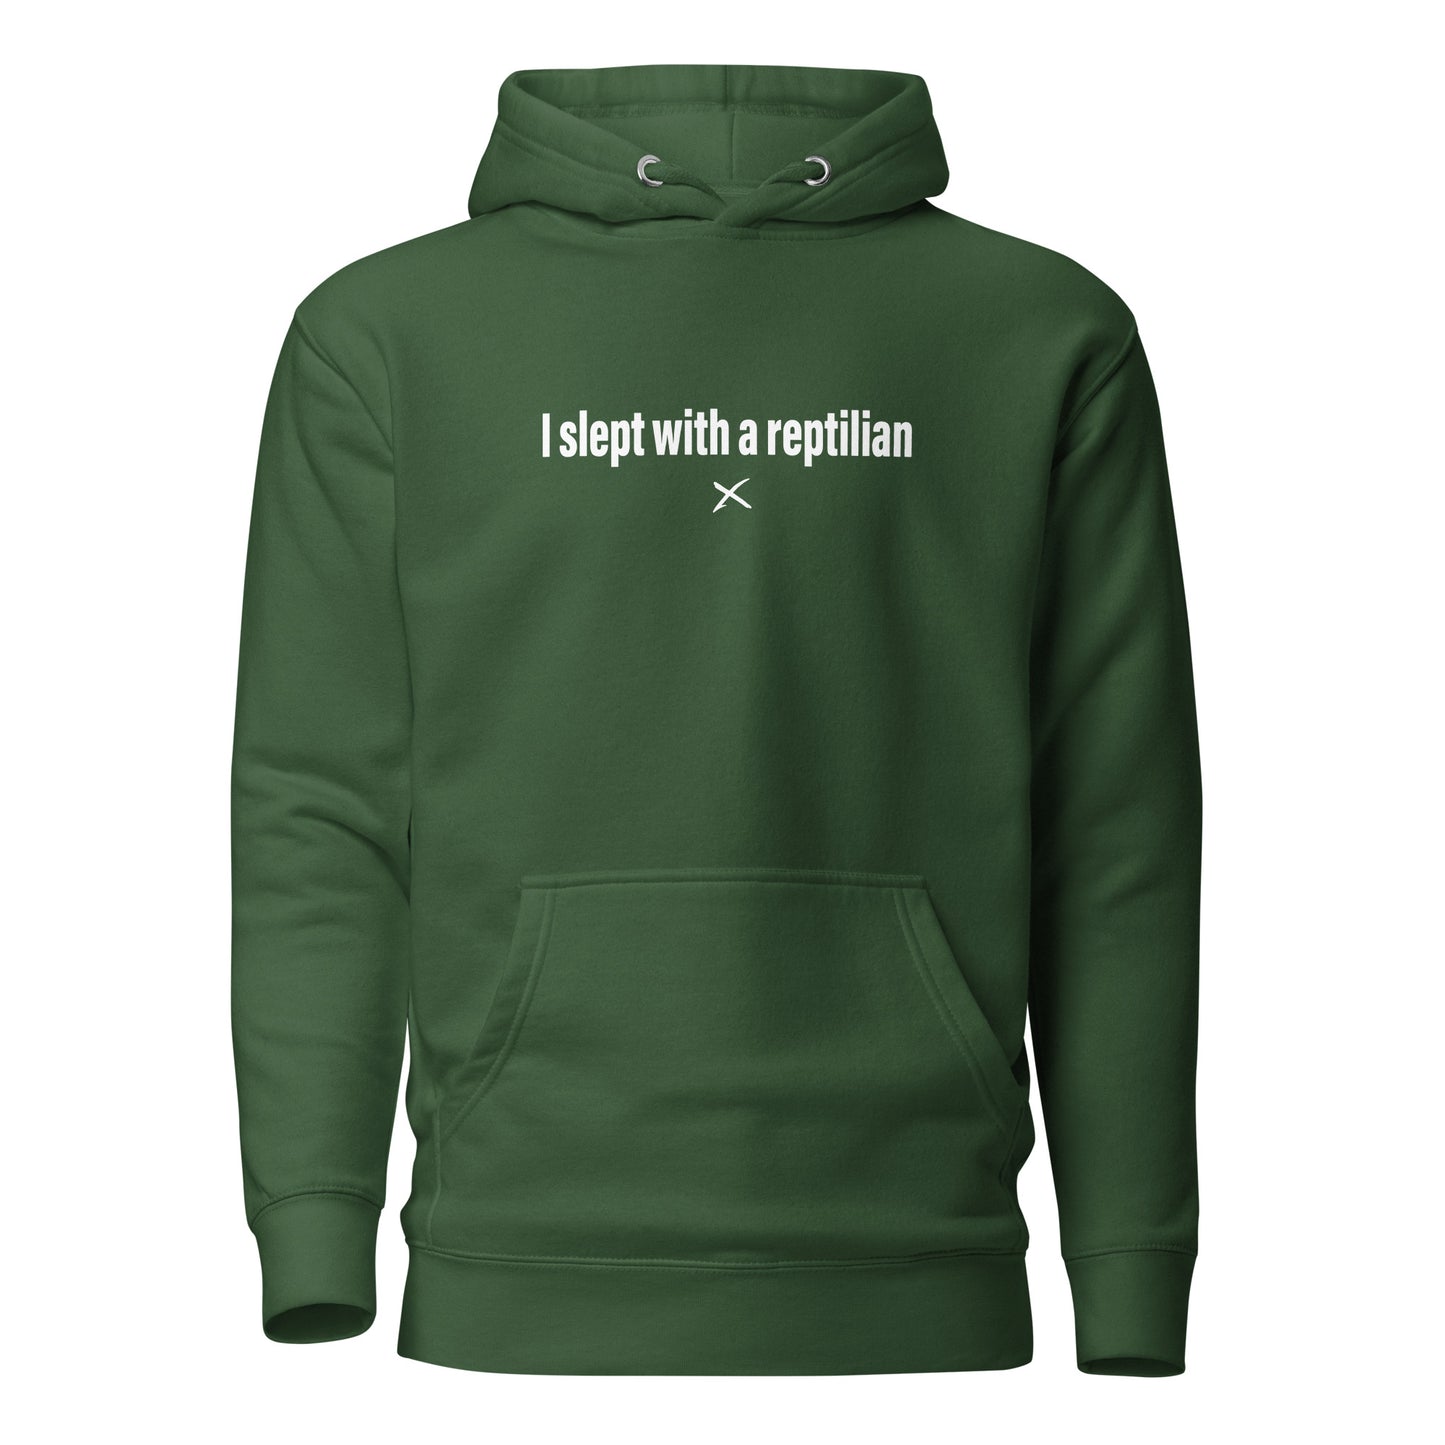 I slept with a reptilian - Hoodie